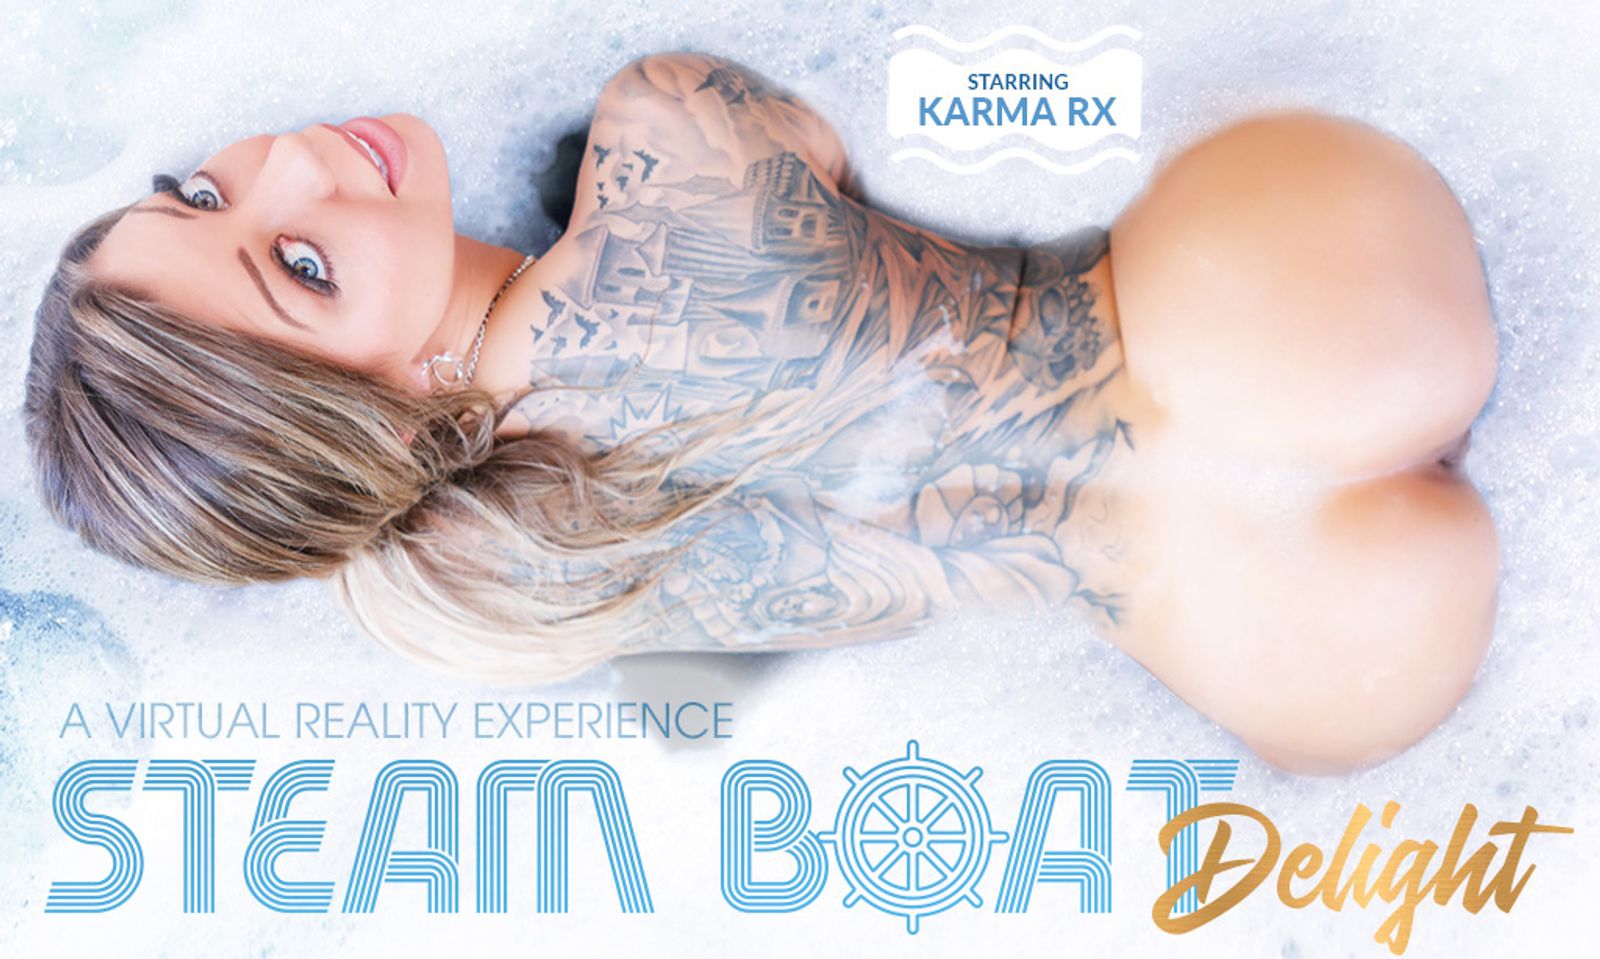 Sexy Karma Rx BJs Users in the Bath in New VR Bangers Scene